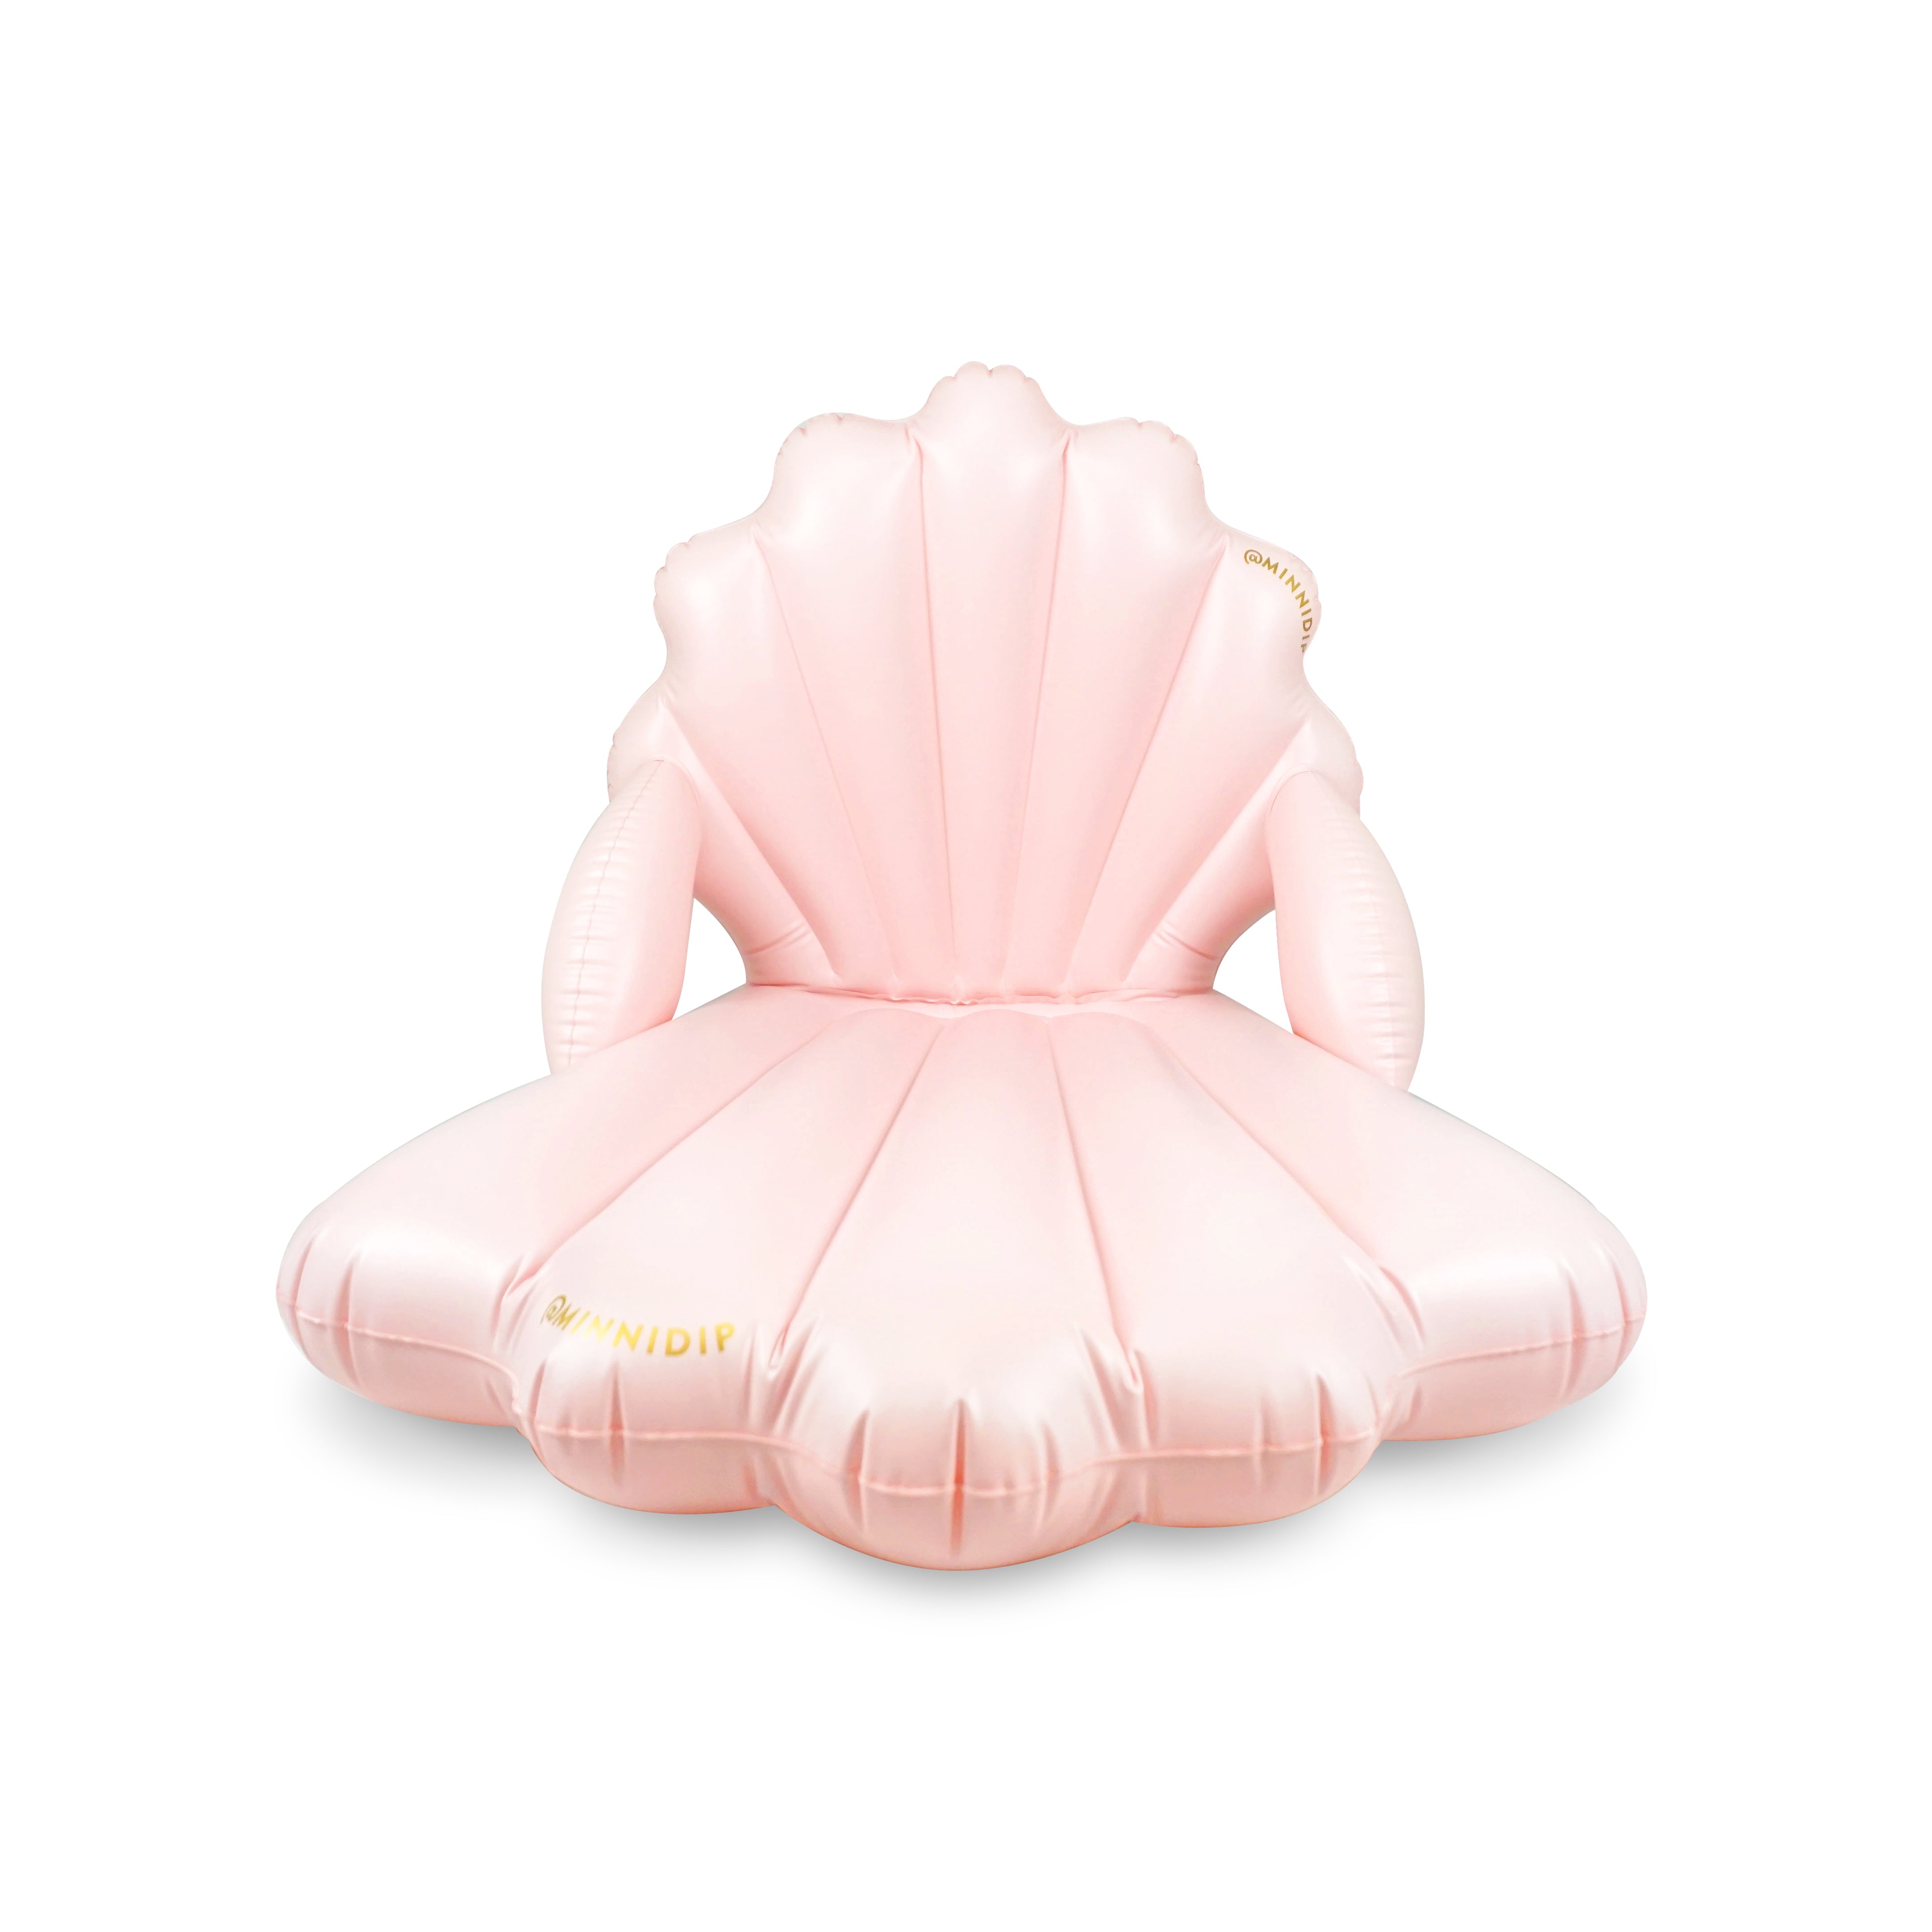 the BLUSH SHELL Luxe Inflatable Chaise Lounger